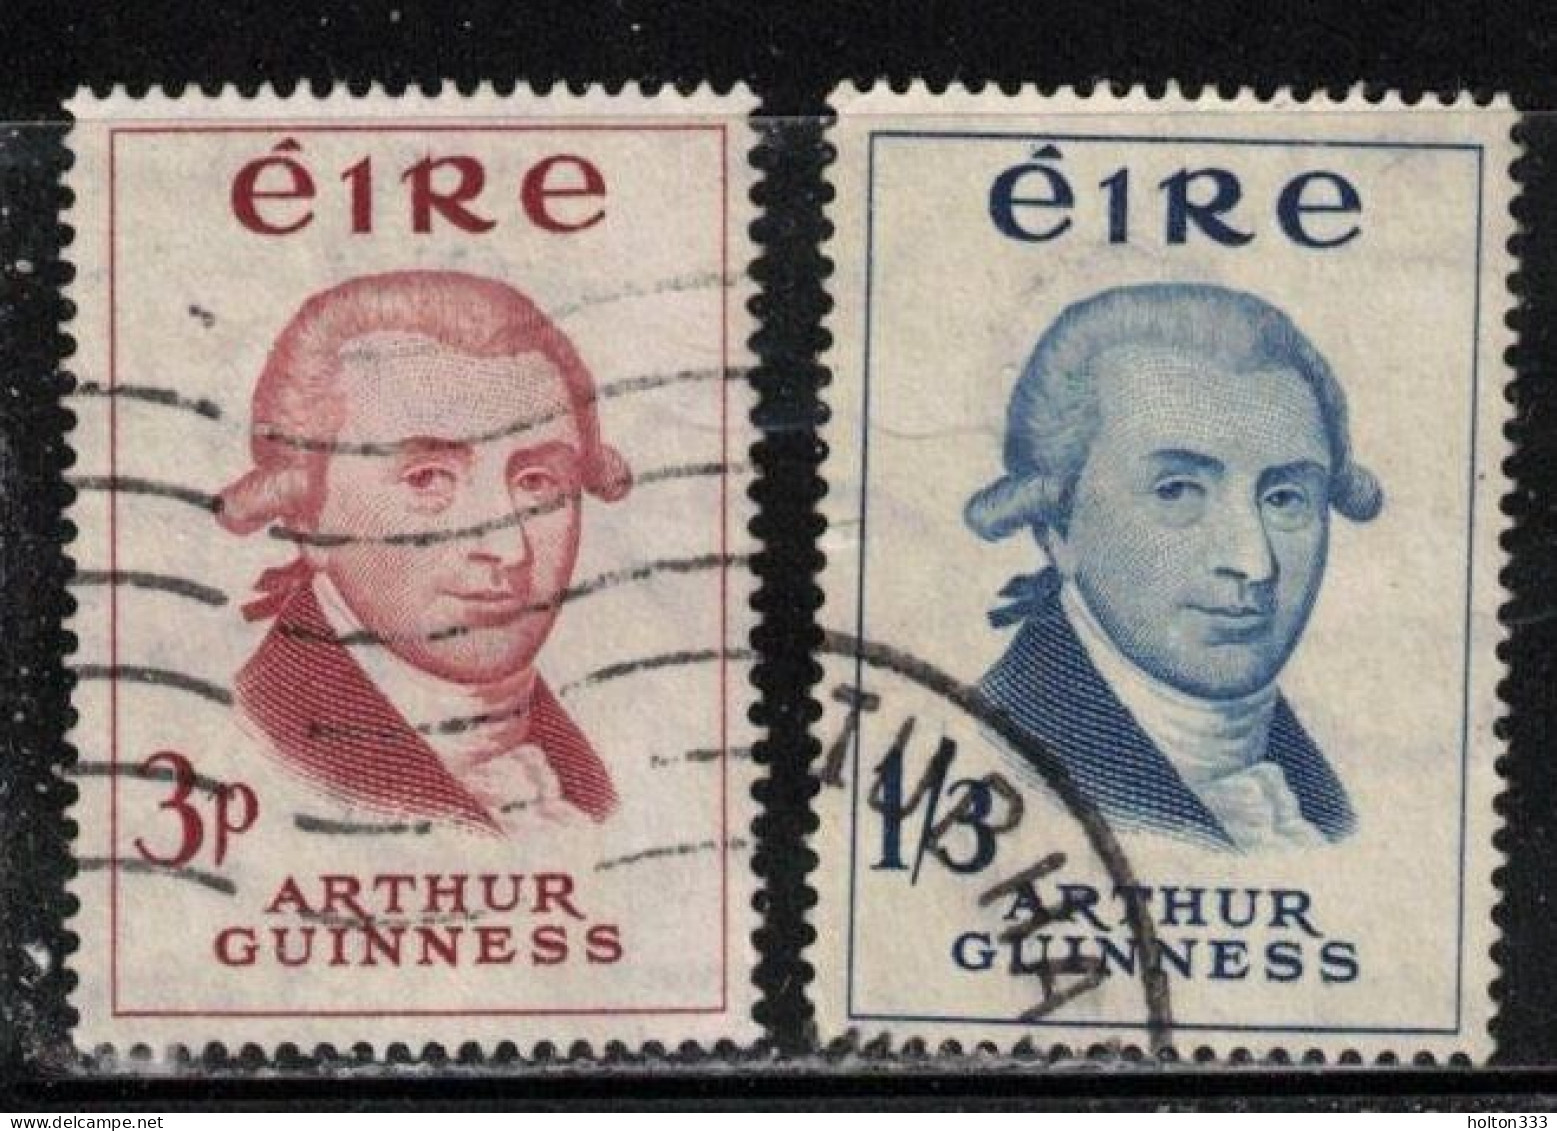 IRELAND Scott # 171-2 Used - Arthur Guinness A - Used Stamps